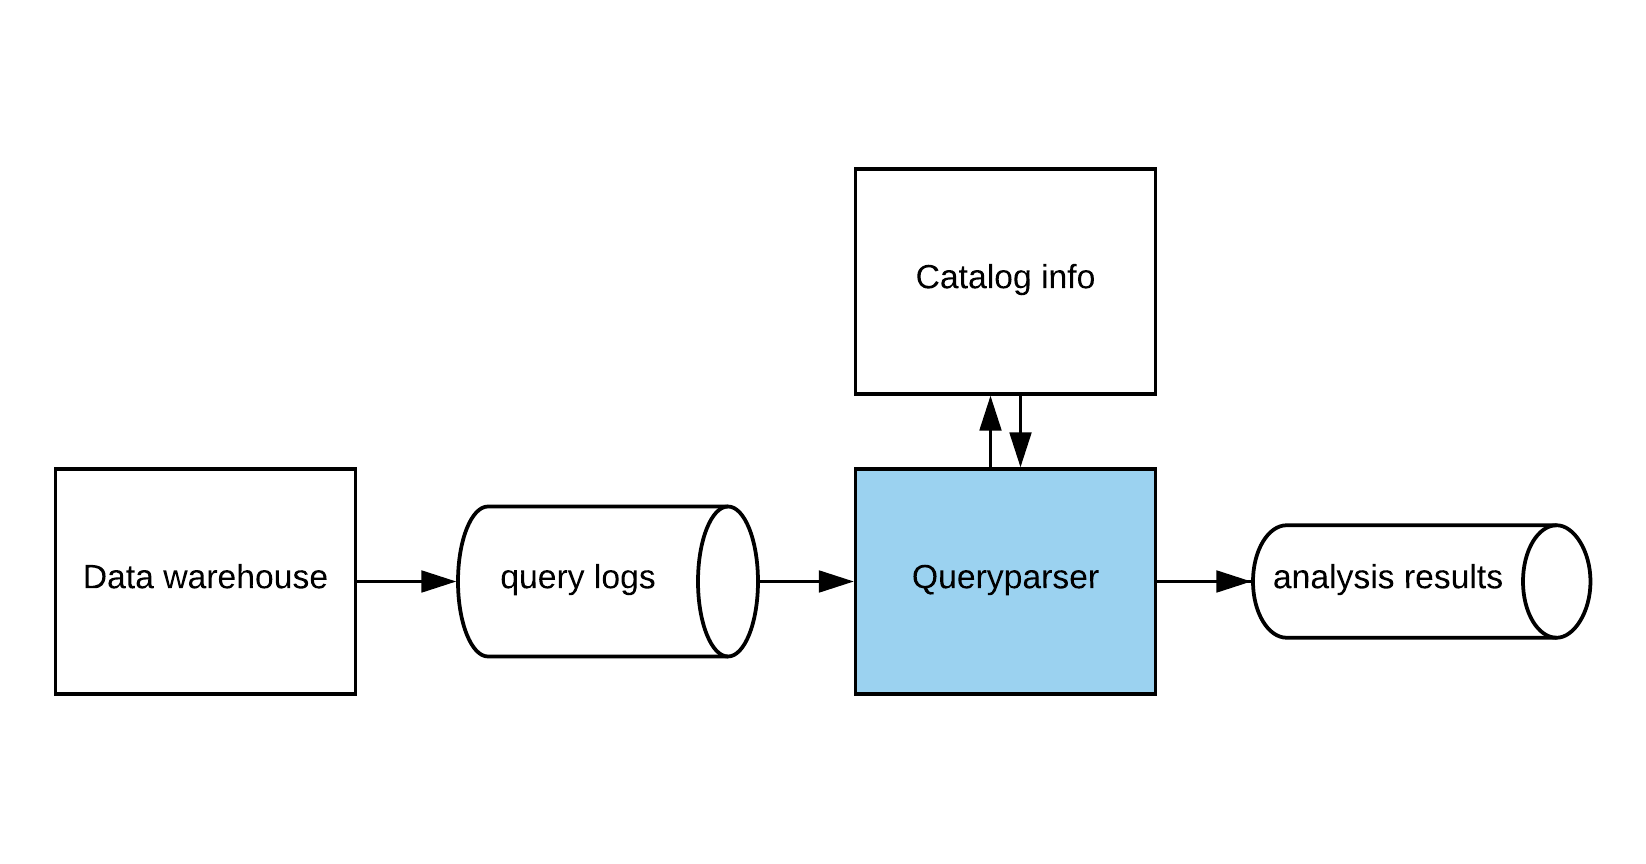 Queryparser, an Open Source Tool for Parsing and Analyzing SQL